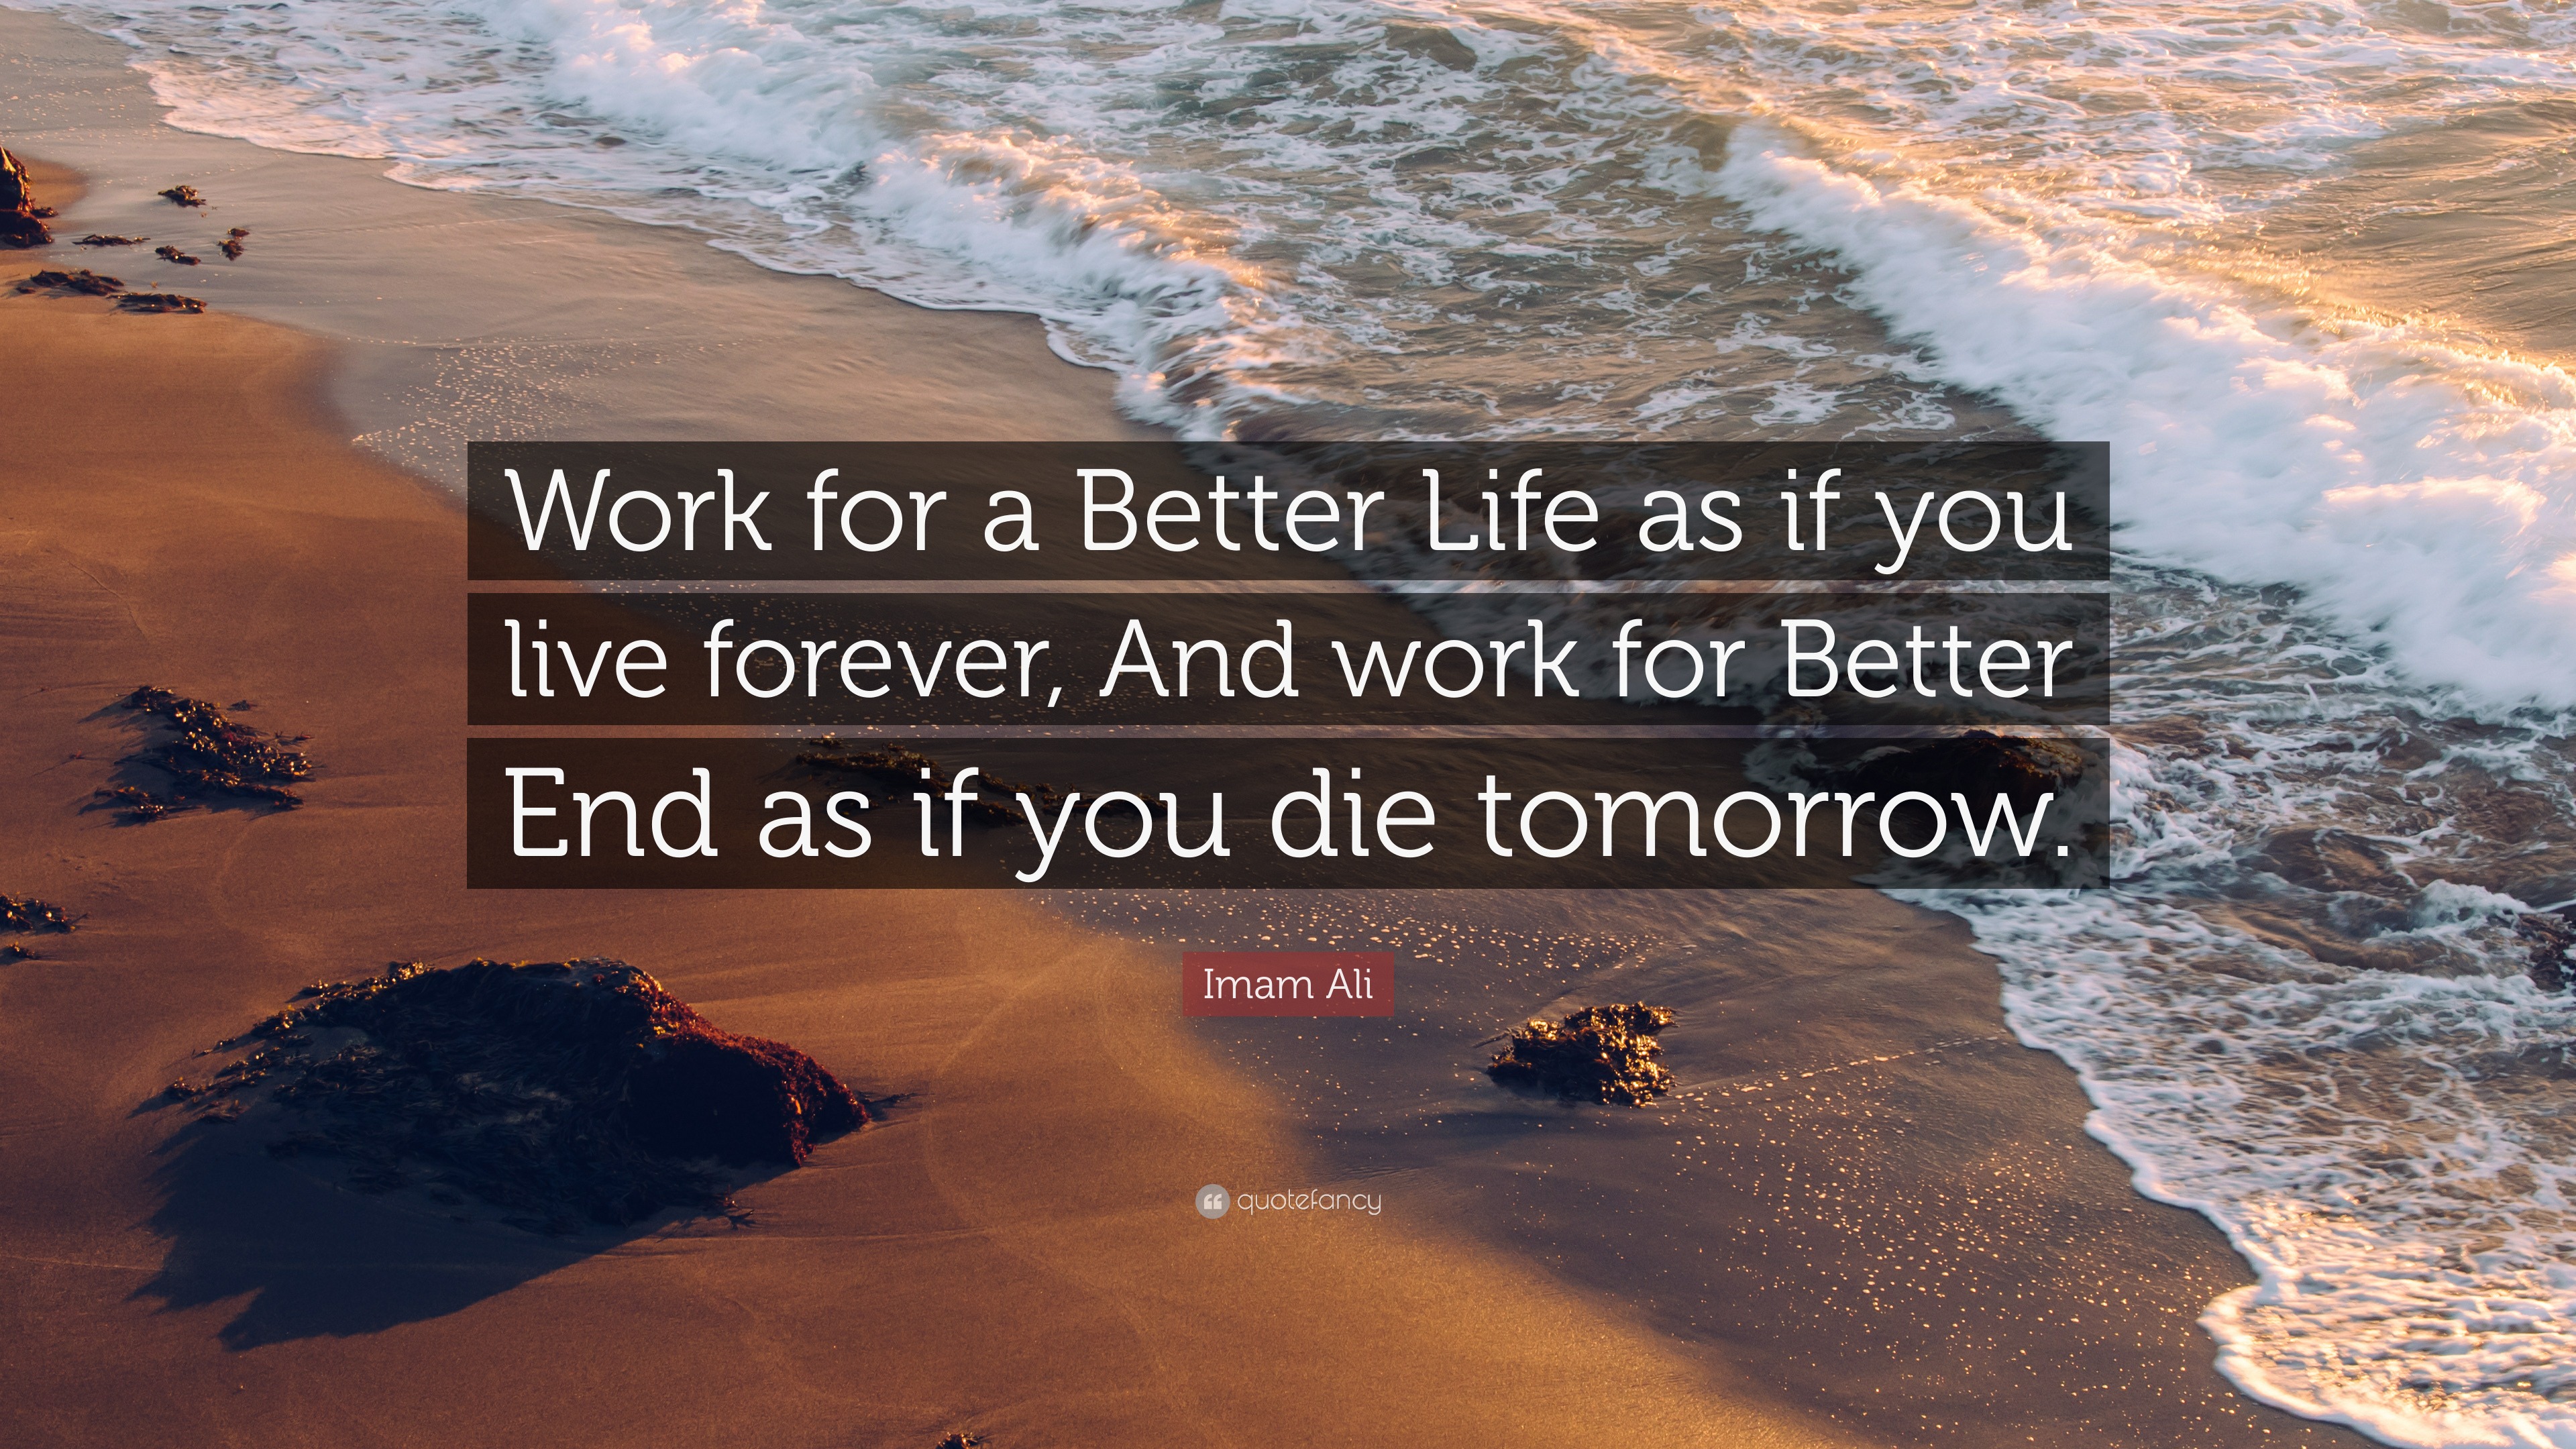 Imam Ali Quote: “Work for a Better Life as if you live forever, And